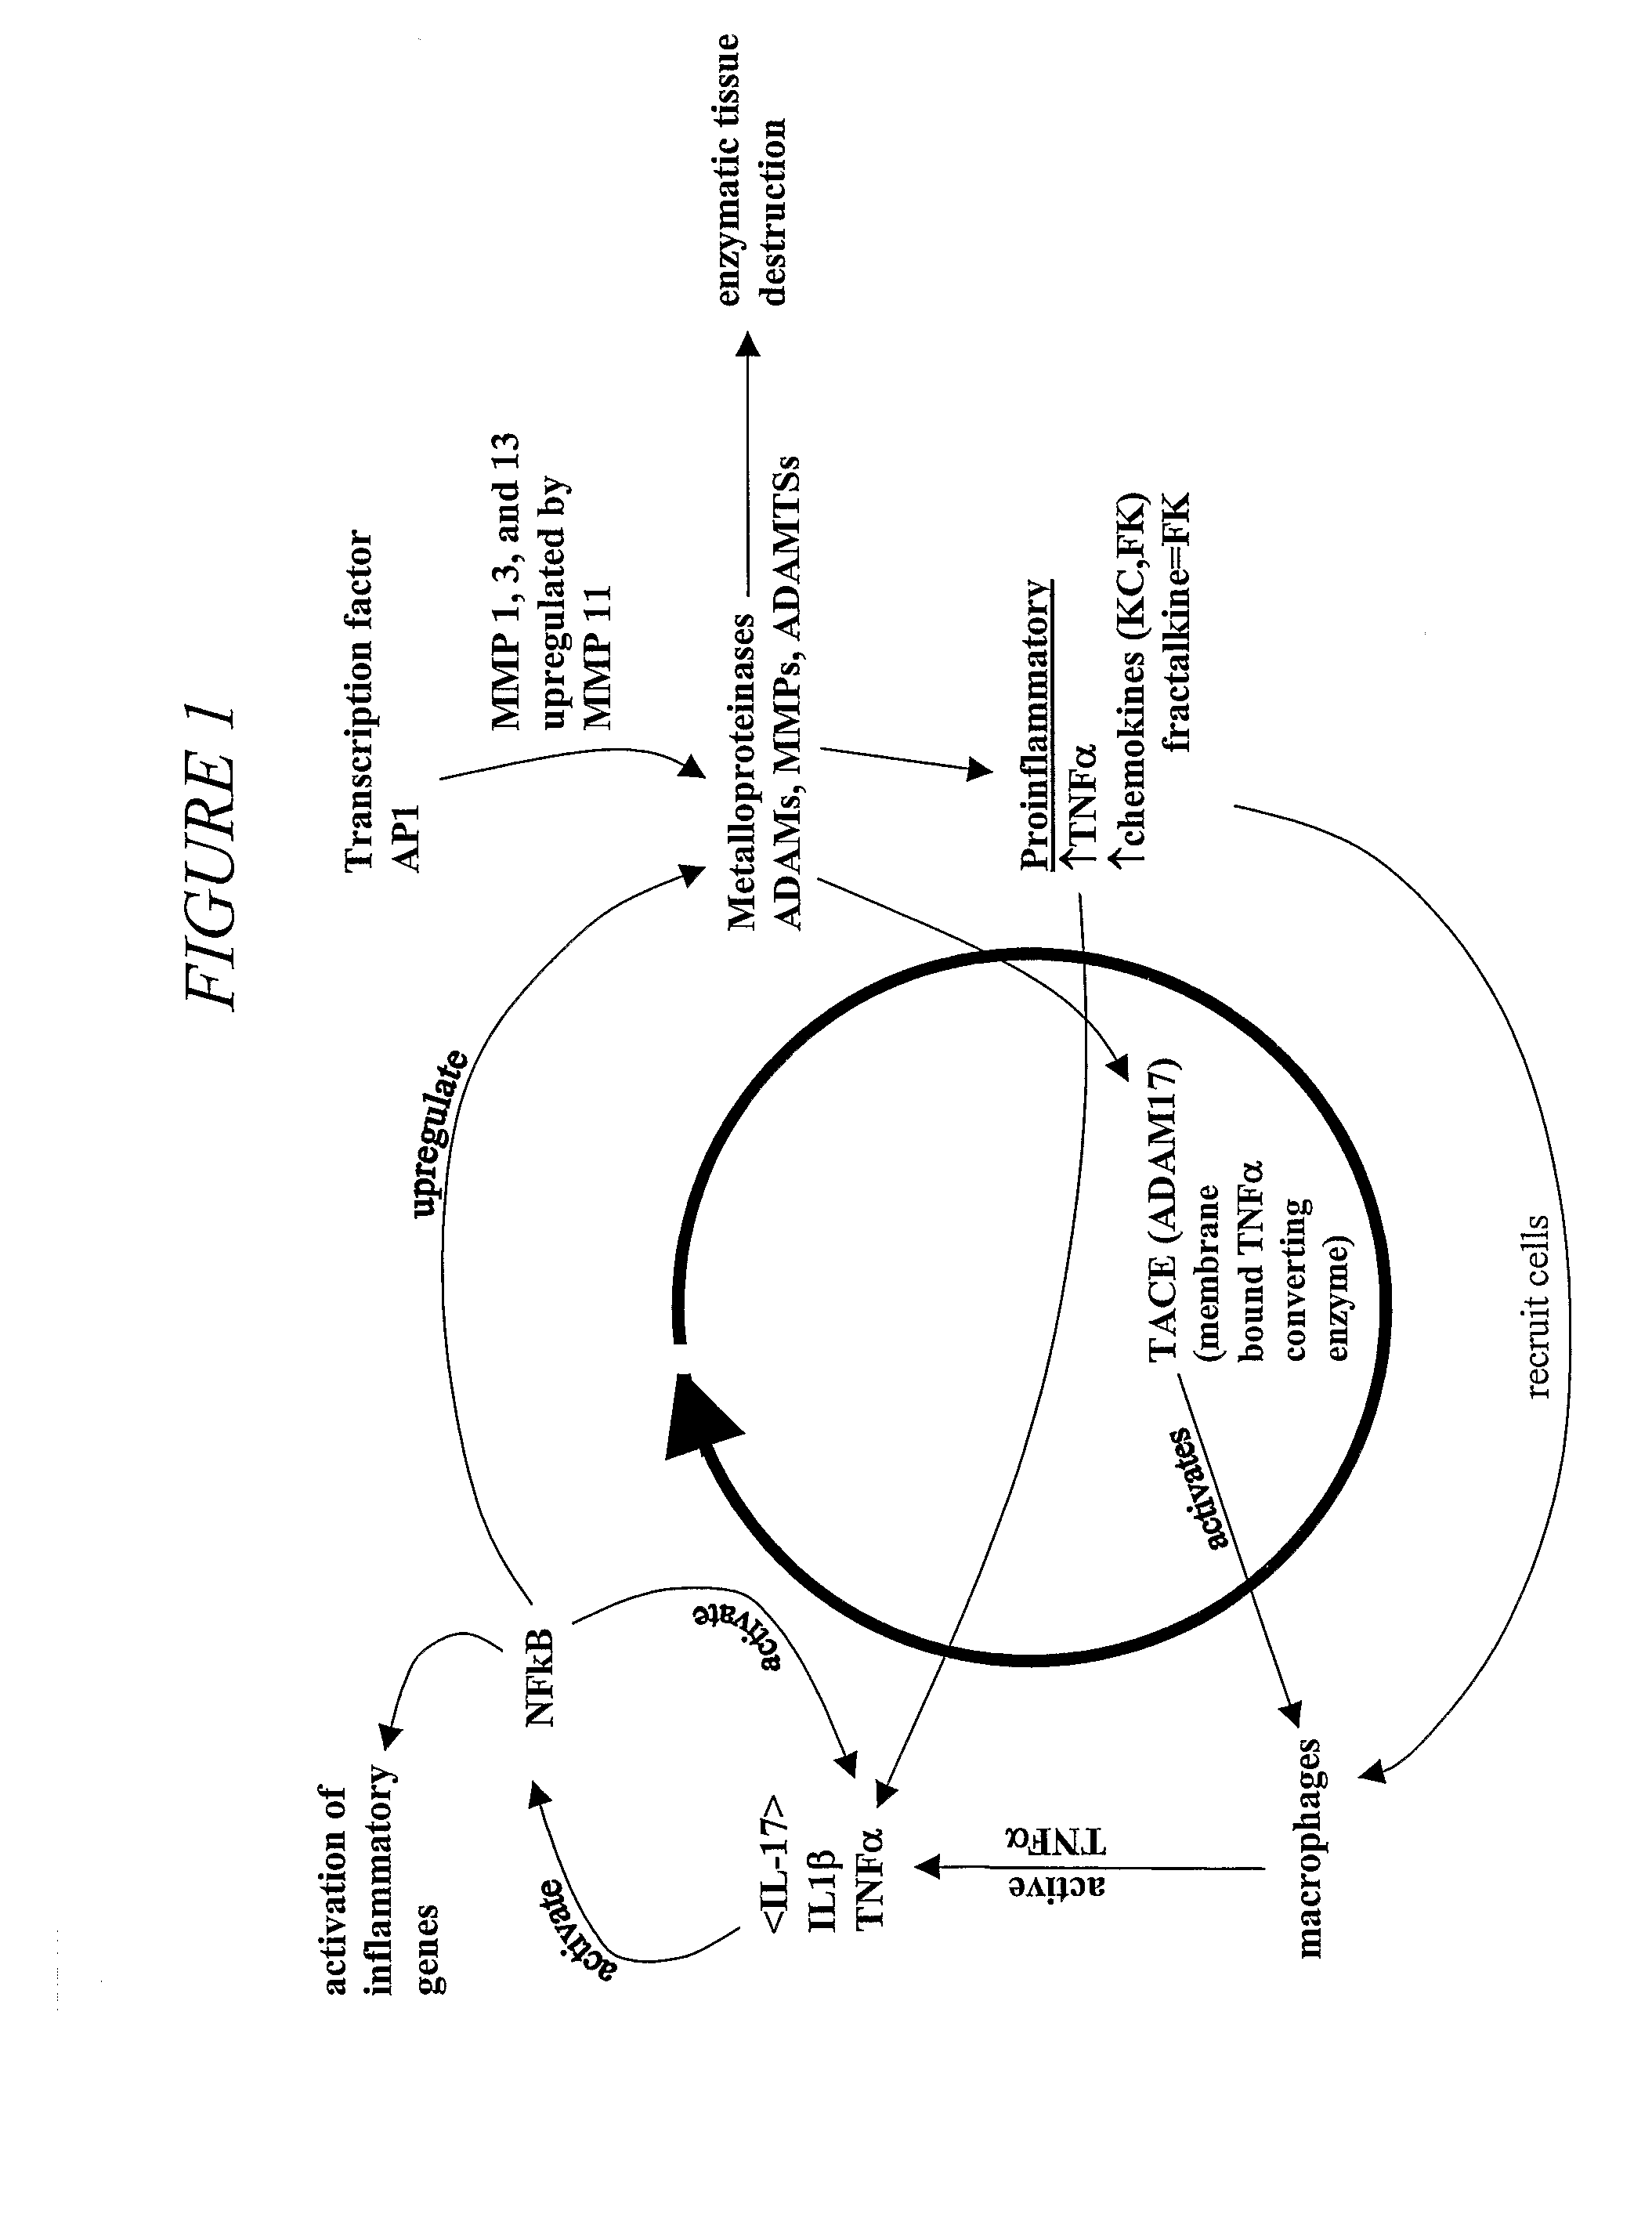 Compositions and Methods for Treating and Preventing Inflammatory and/or Degenerative Processes in Humans and Other Animals